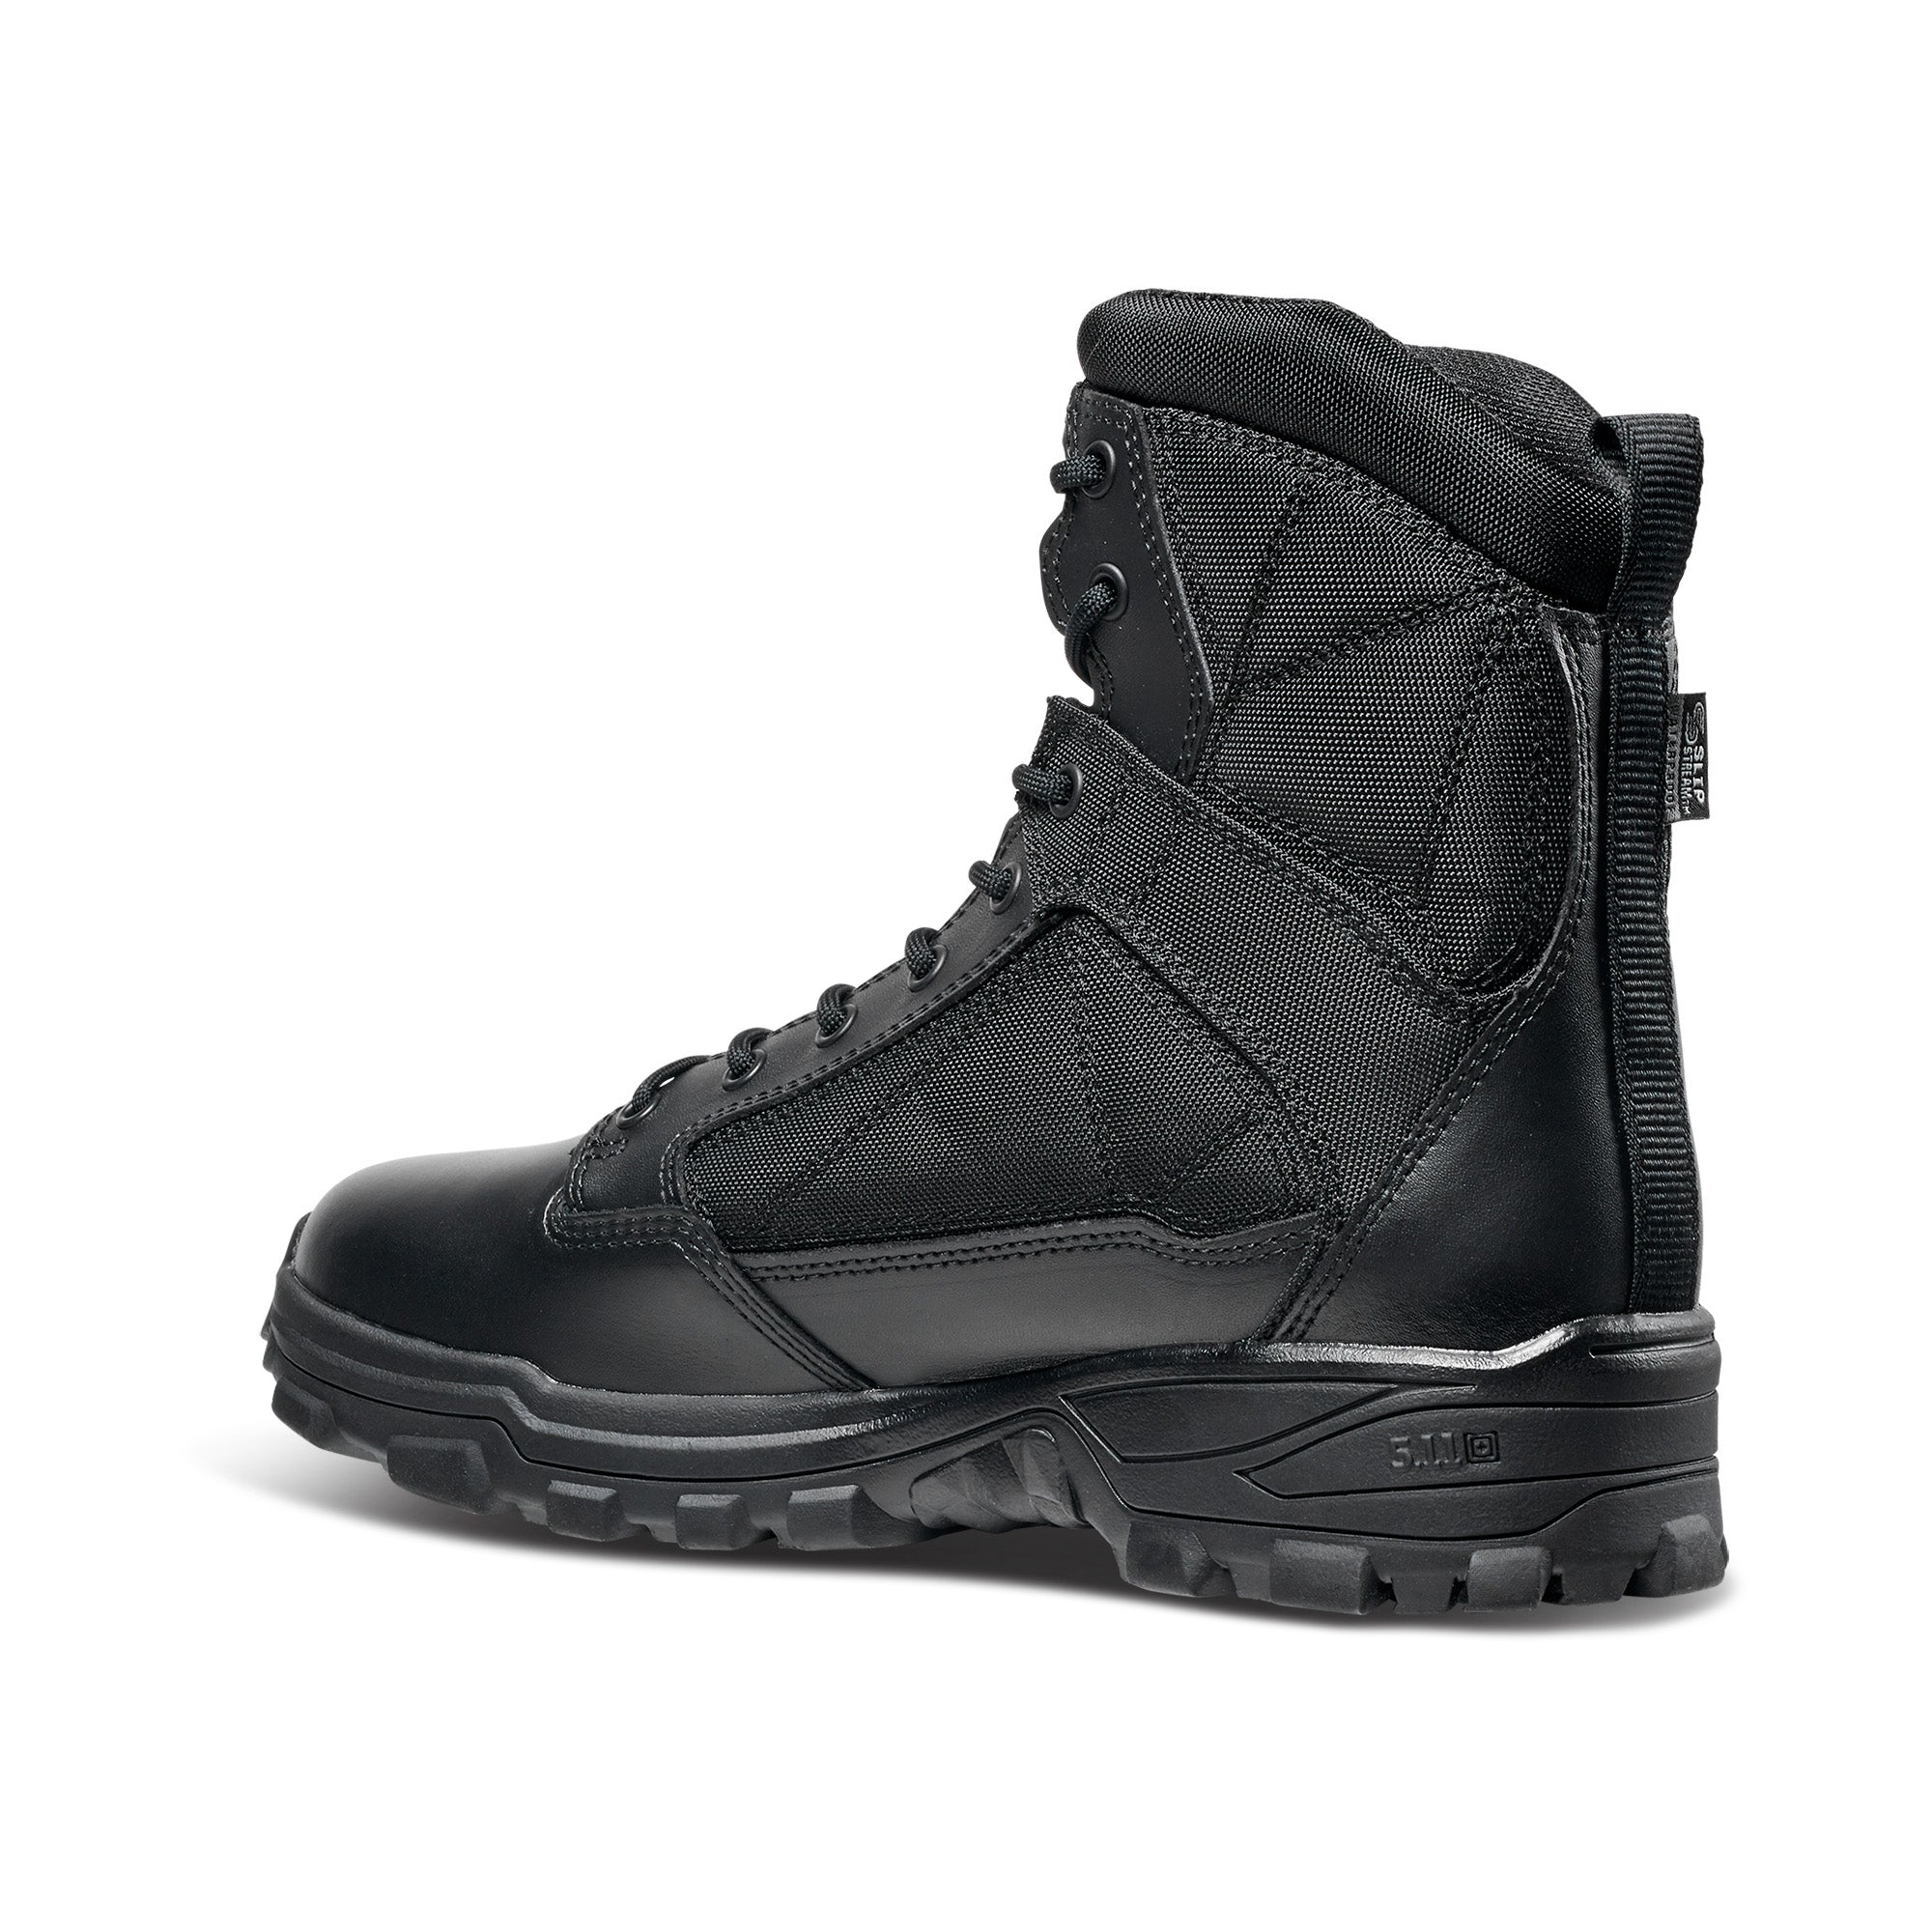 5.11 Tactical Fast-Tac Waterproof 6" Boots